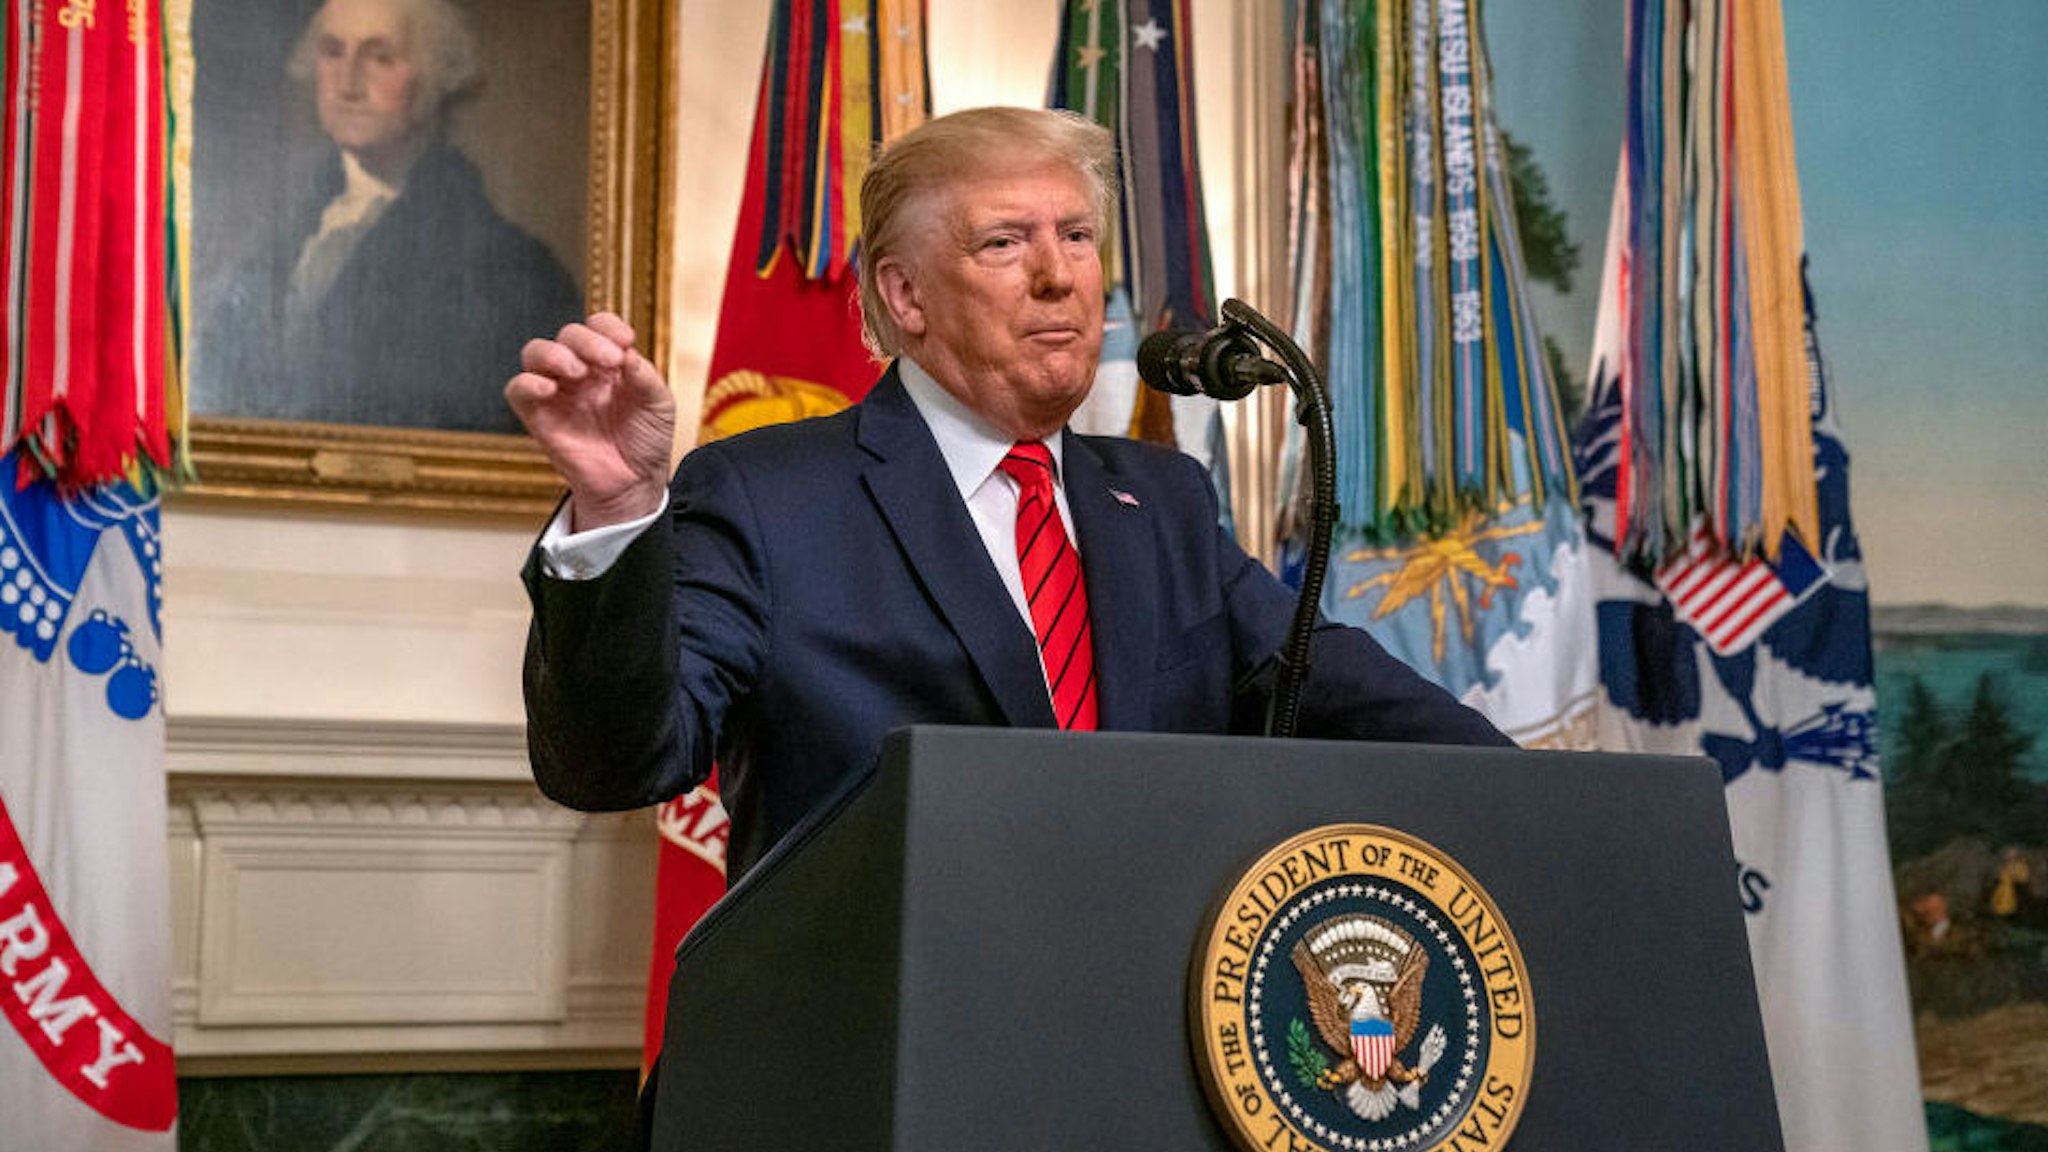 WASHINGTON, DC - OCTOBER 27: U.S. President Donald Trump makes a statement in the Diplomatic Reception Room of the White House October 27, 2019 in Washington, DC. President Trump announced that ISIS leader Abu Bakr al-Baghdadi has been killed in a military operation in northwest Syria.